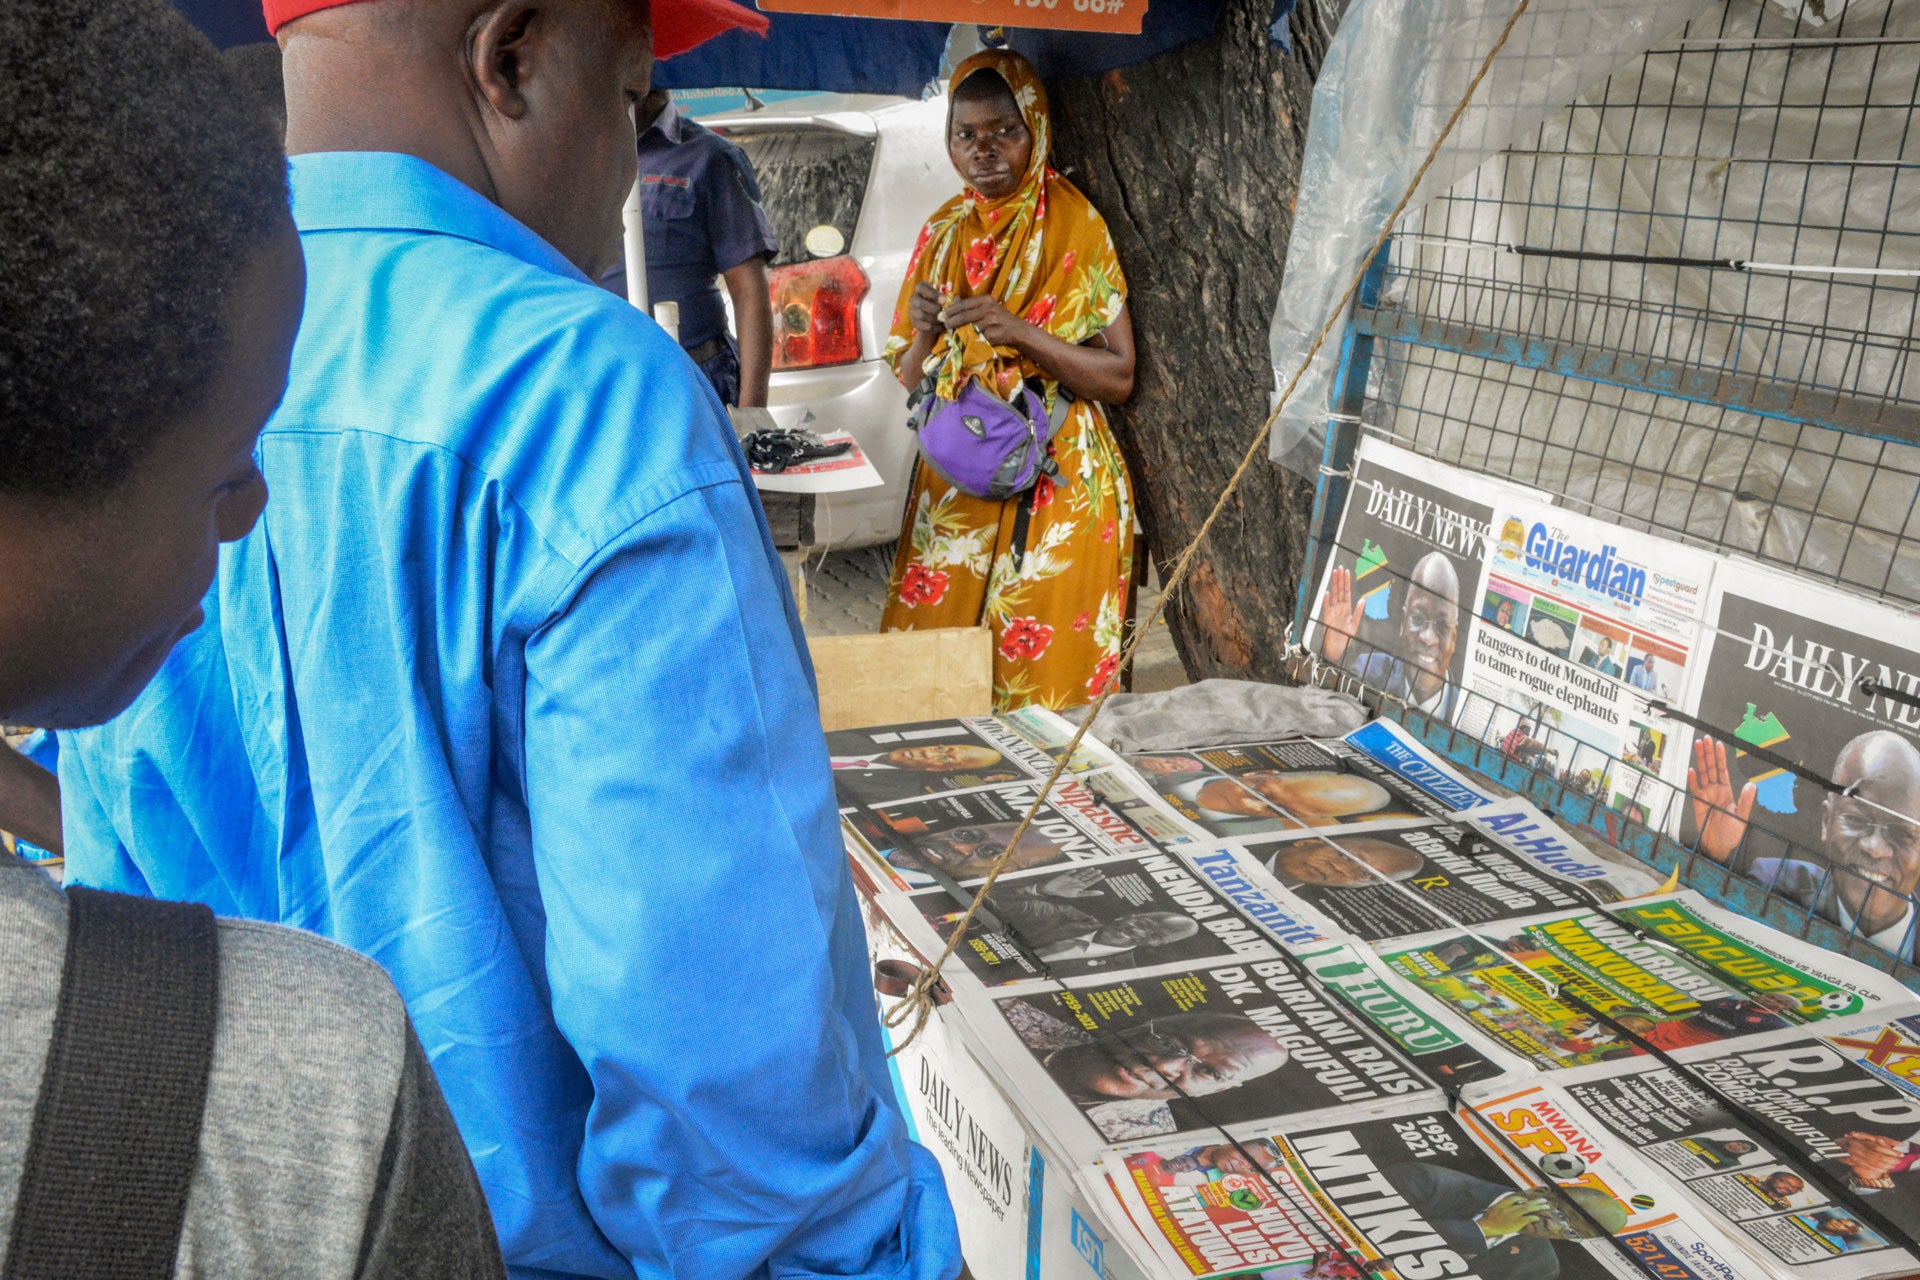 People stop to read front pages at a newspaper stand on a street in Dar es Salaam, Tanzania, March 18, 2021.